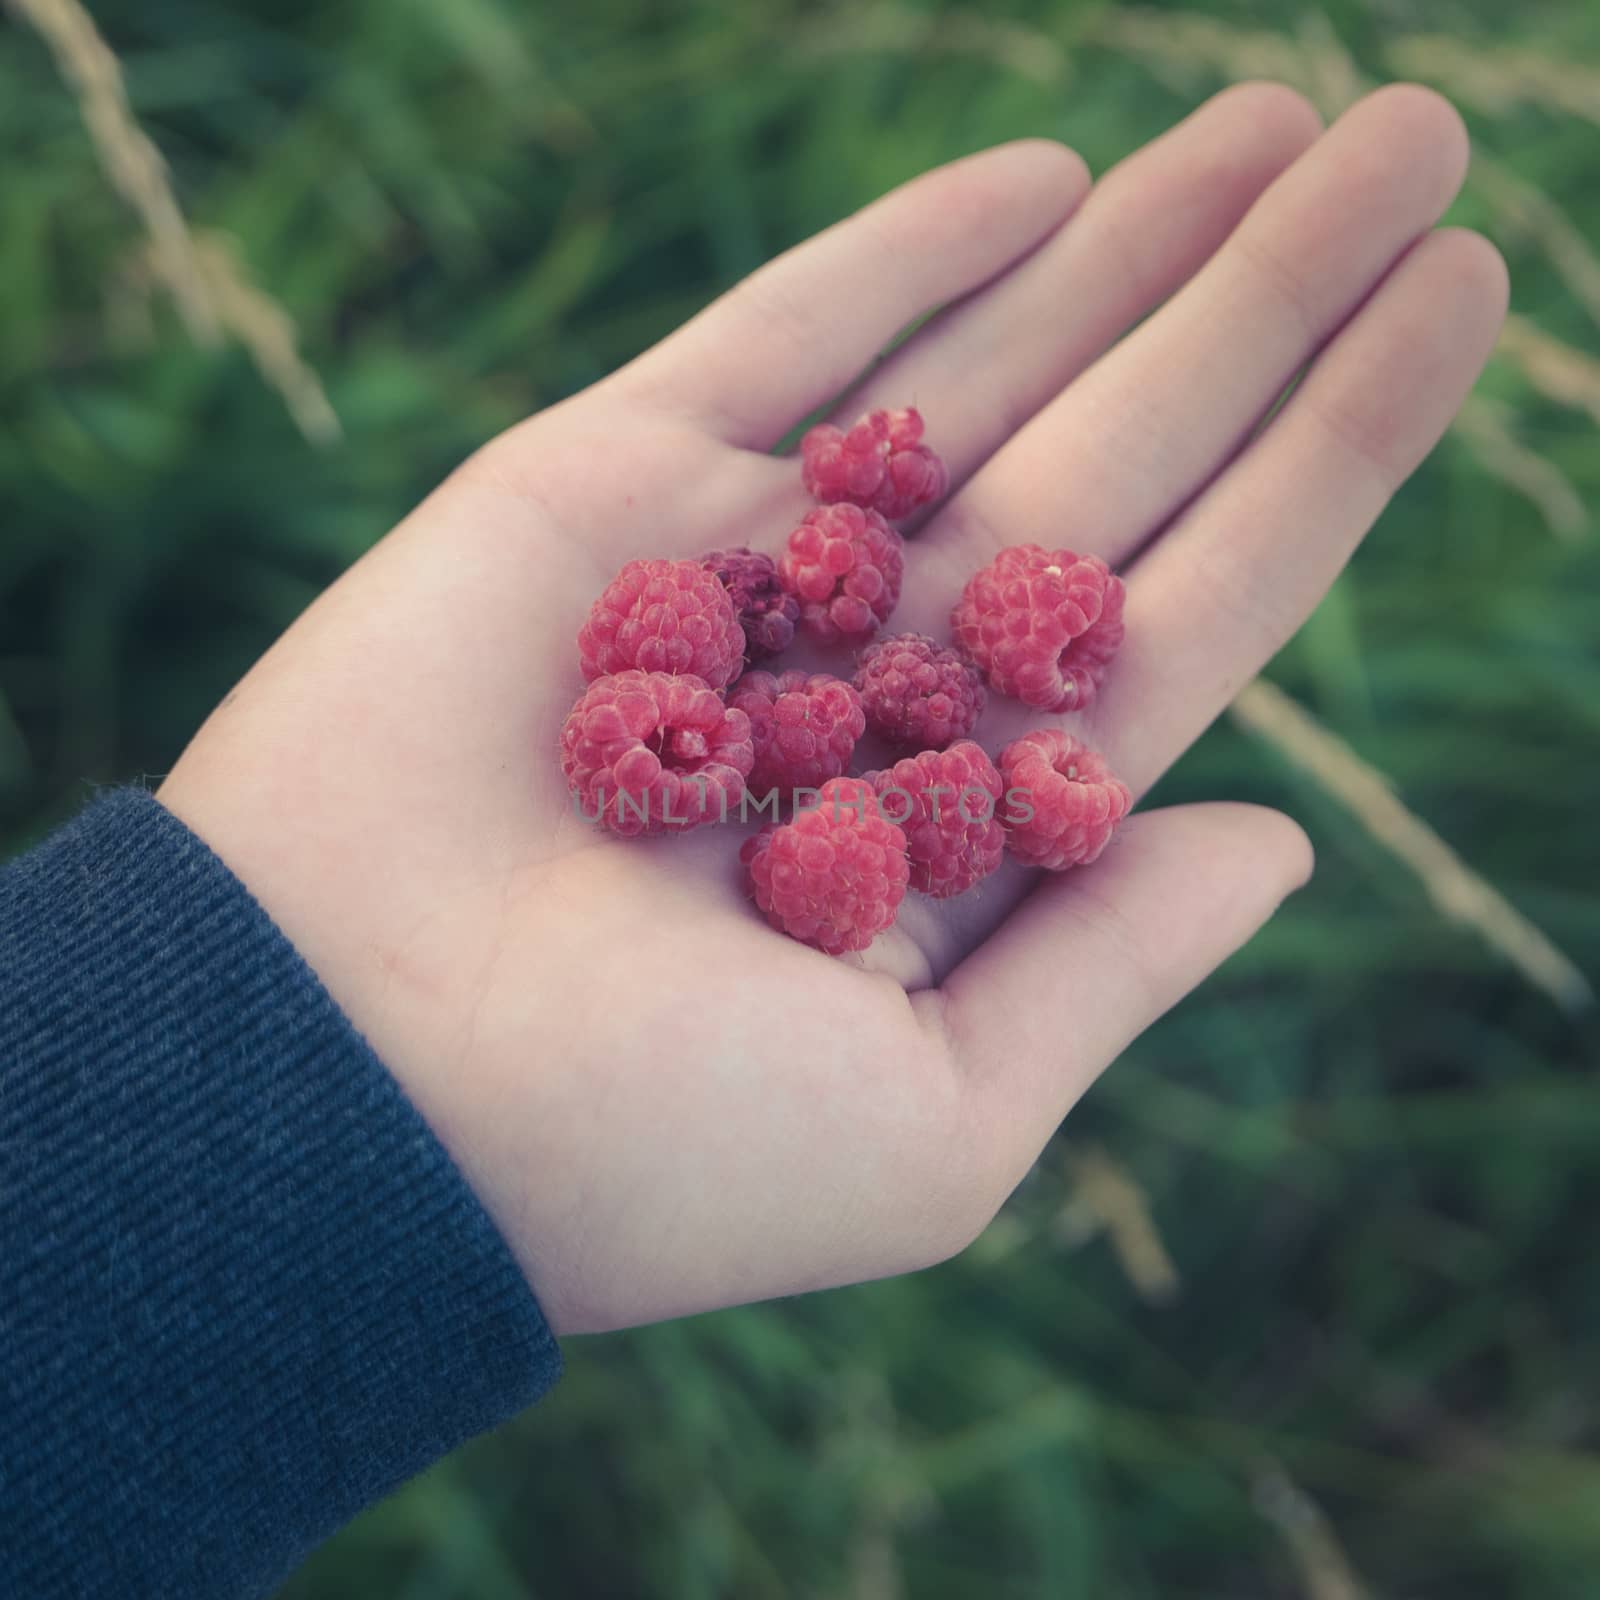 Retro Style Healthy Eating Concept Image Of A Child Holding Some Wild Raspberries